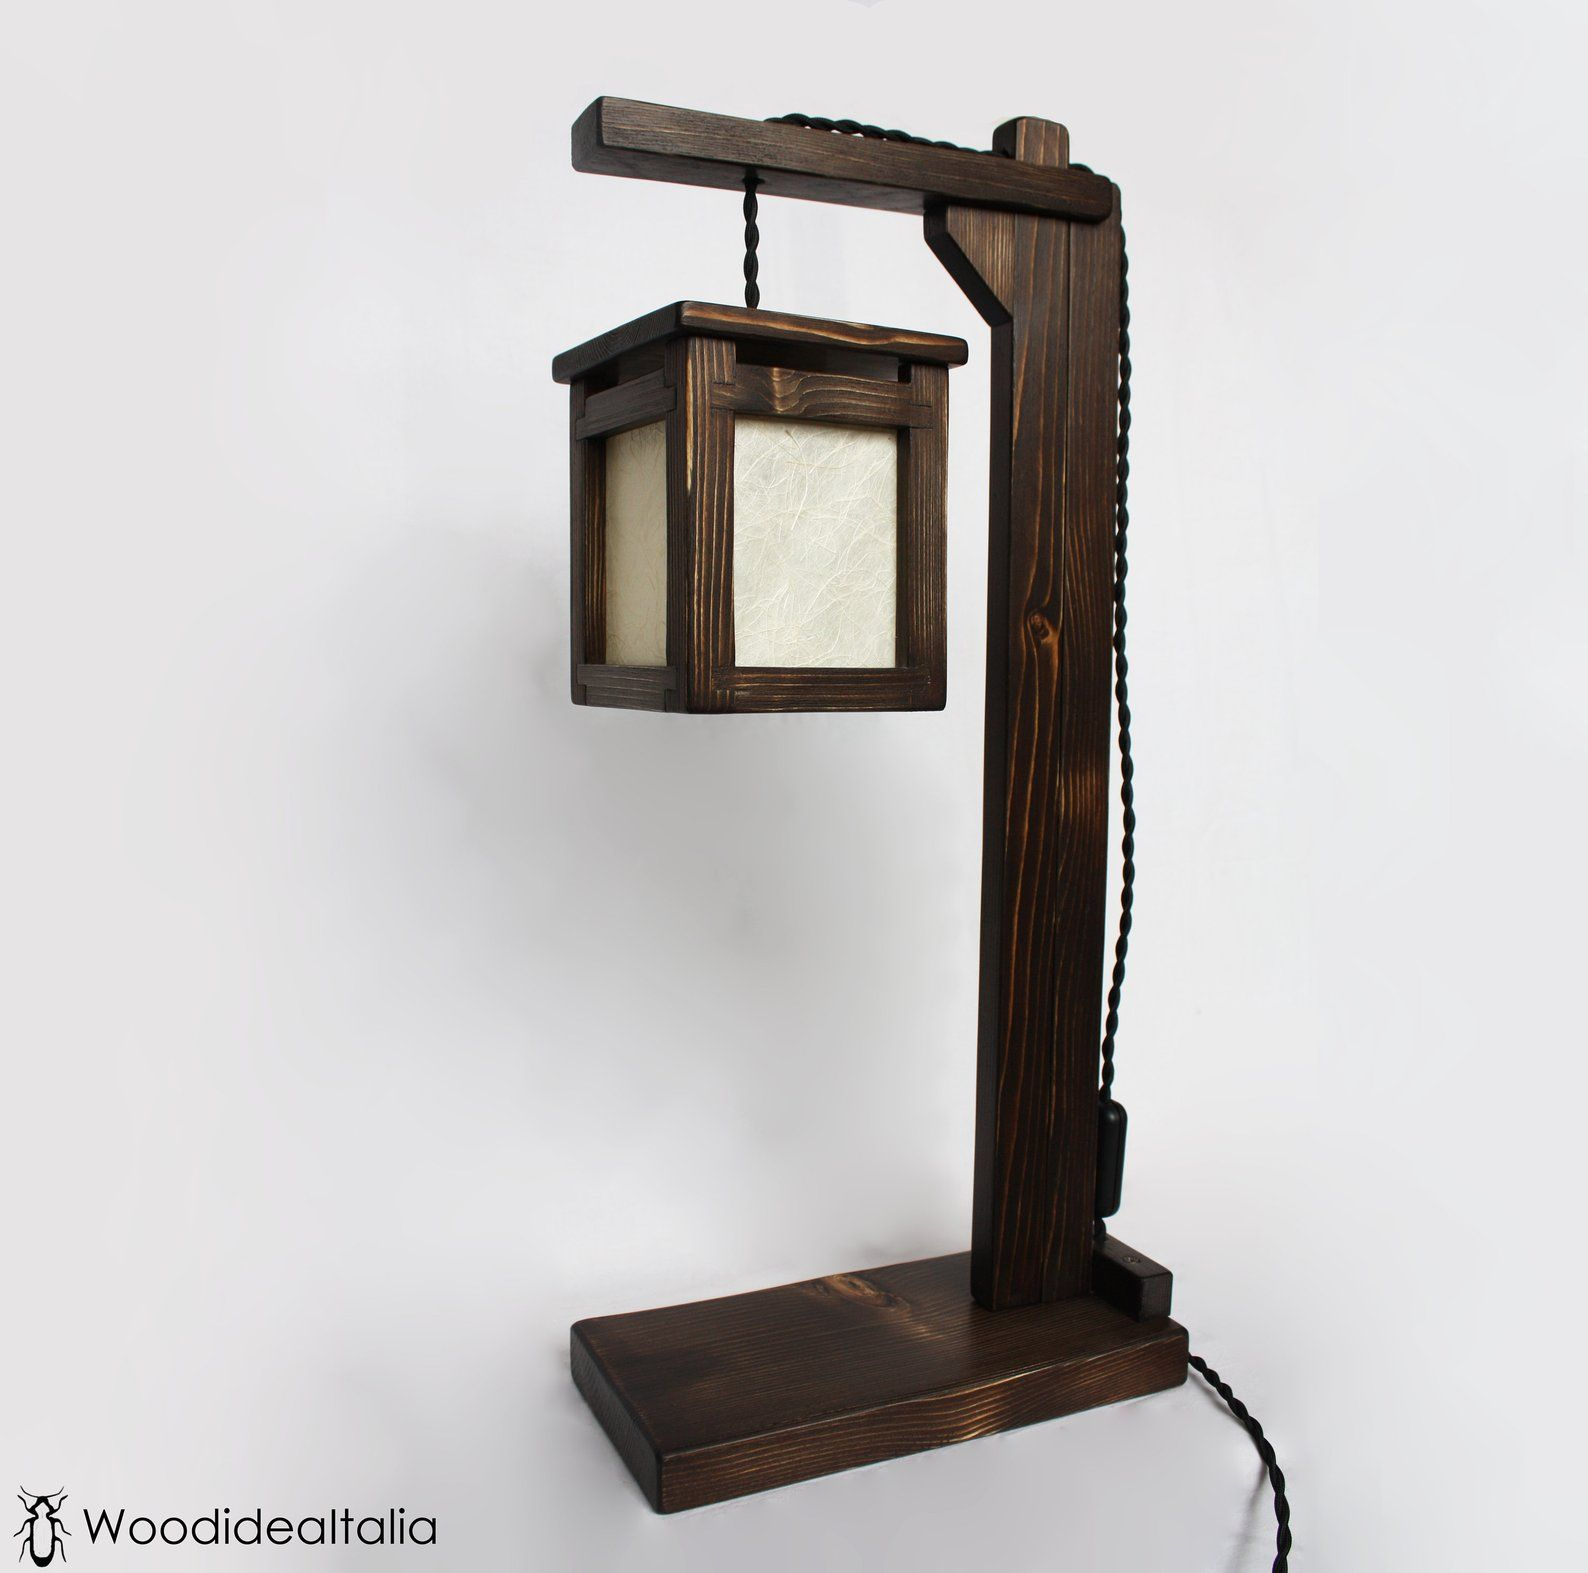 Lantern Style Table Lamp Wood Craft Lamp And Rice Paper intended for dimensions 1588 X 1573